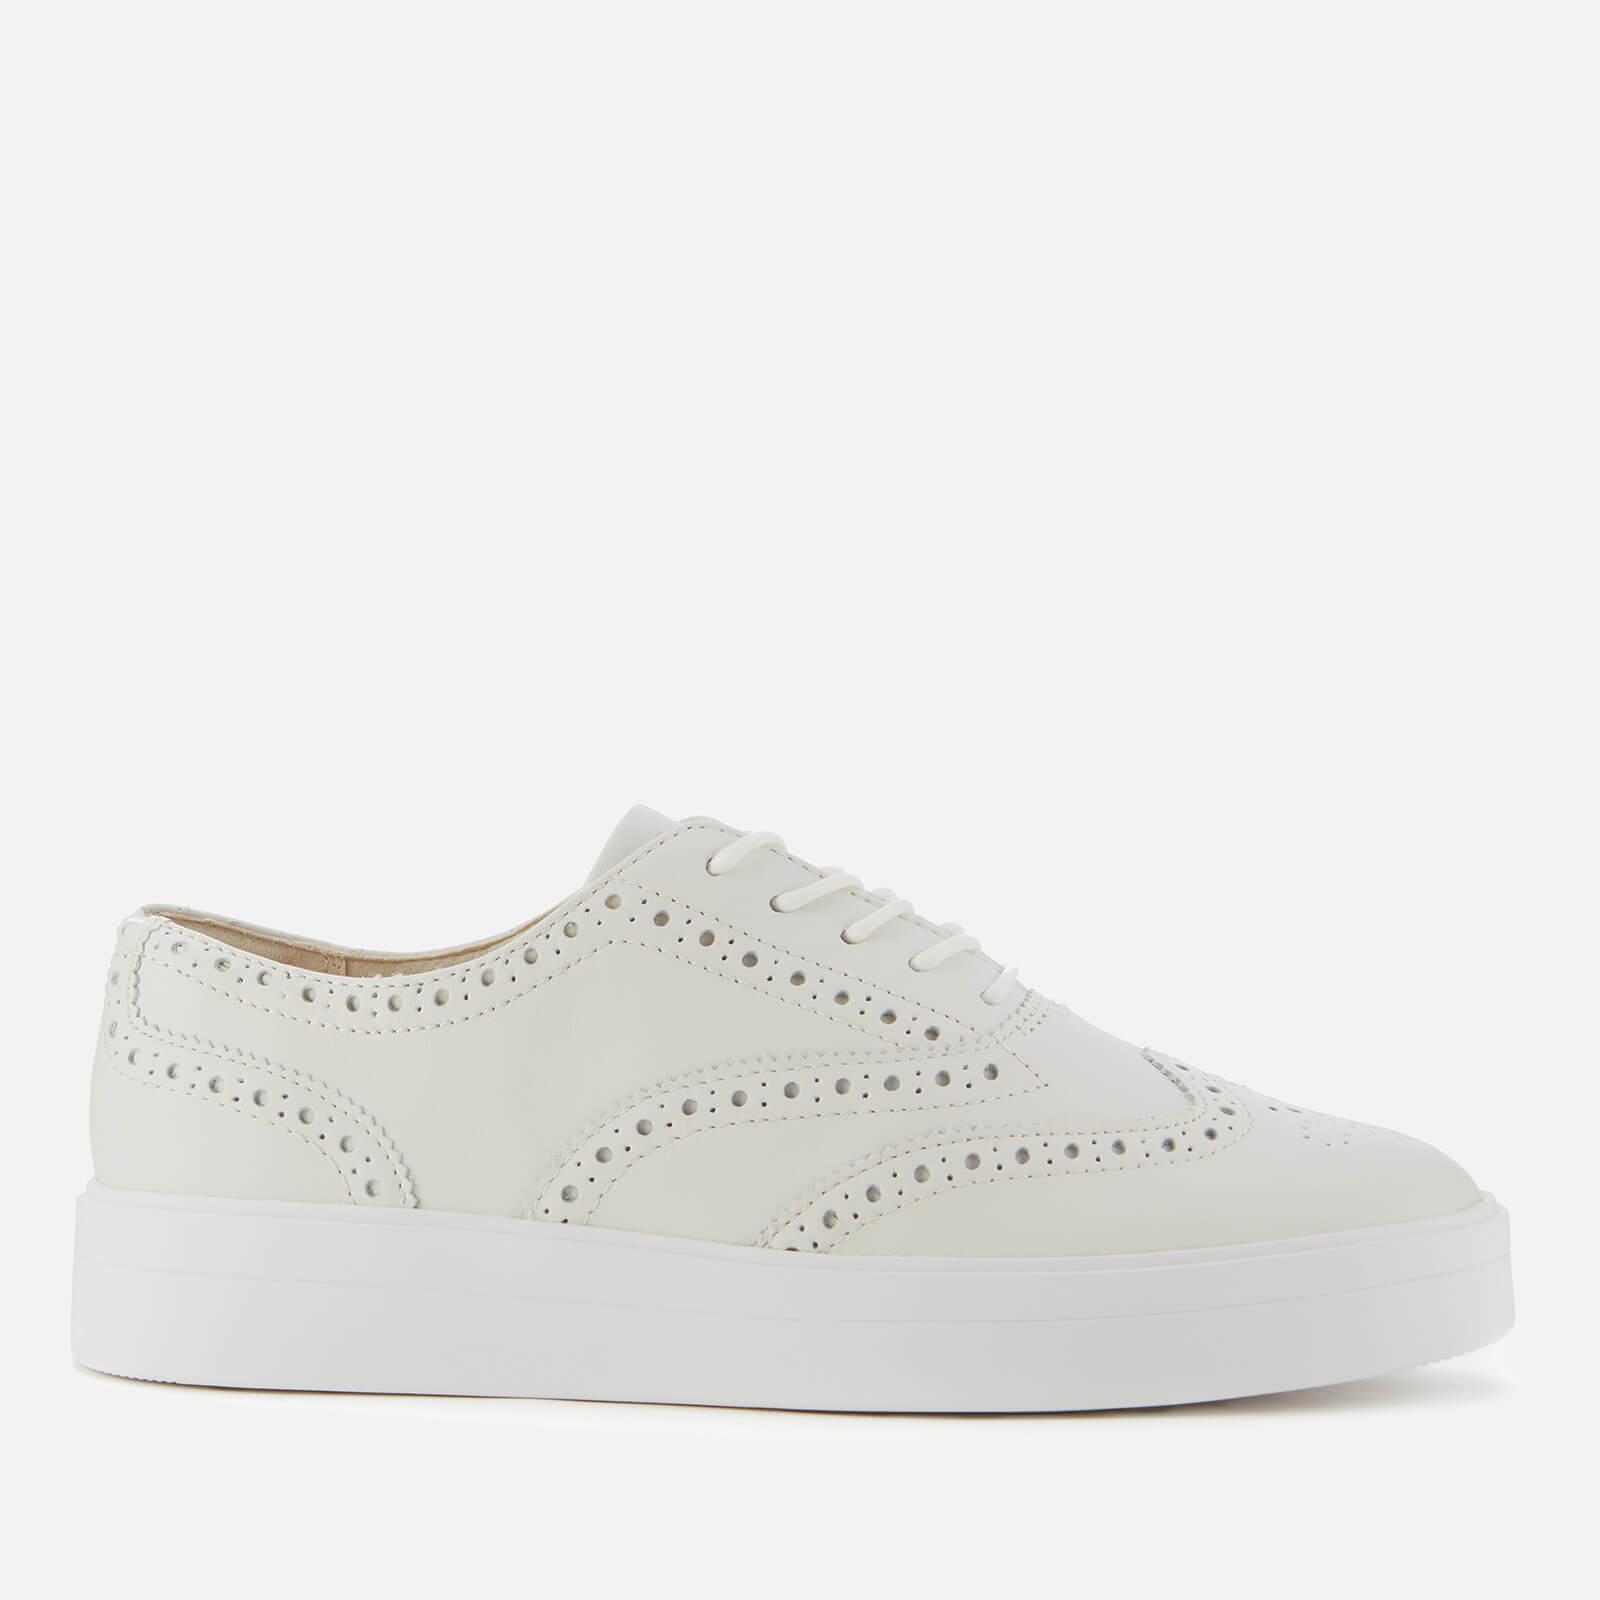 Clarks Hero Leather Brogue Trainers in White | Lyst